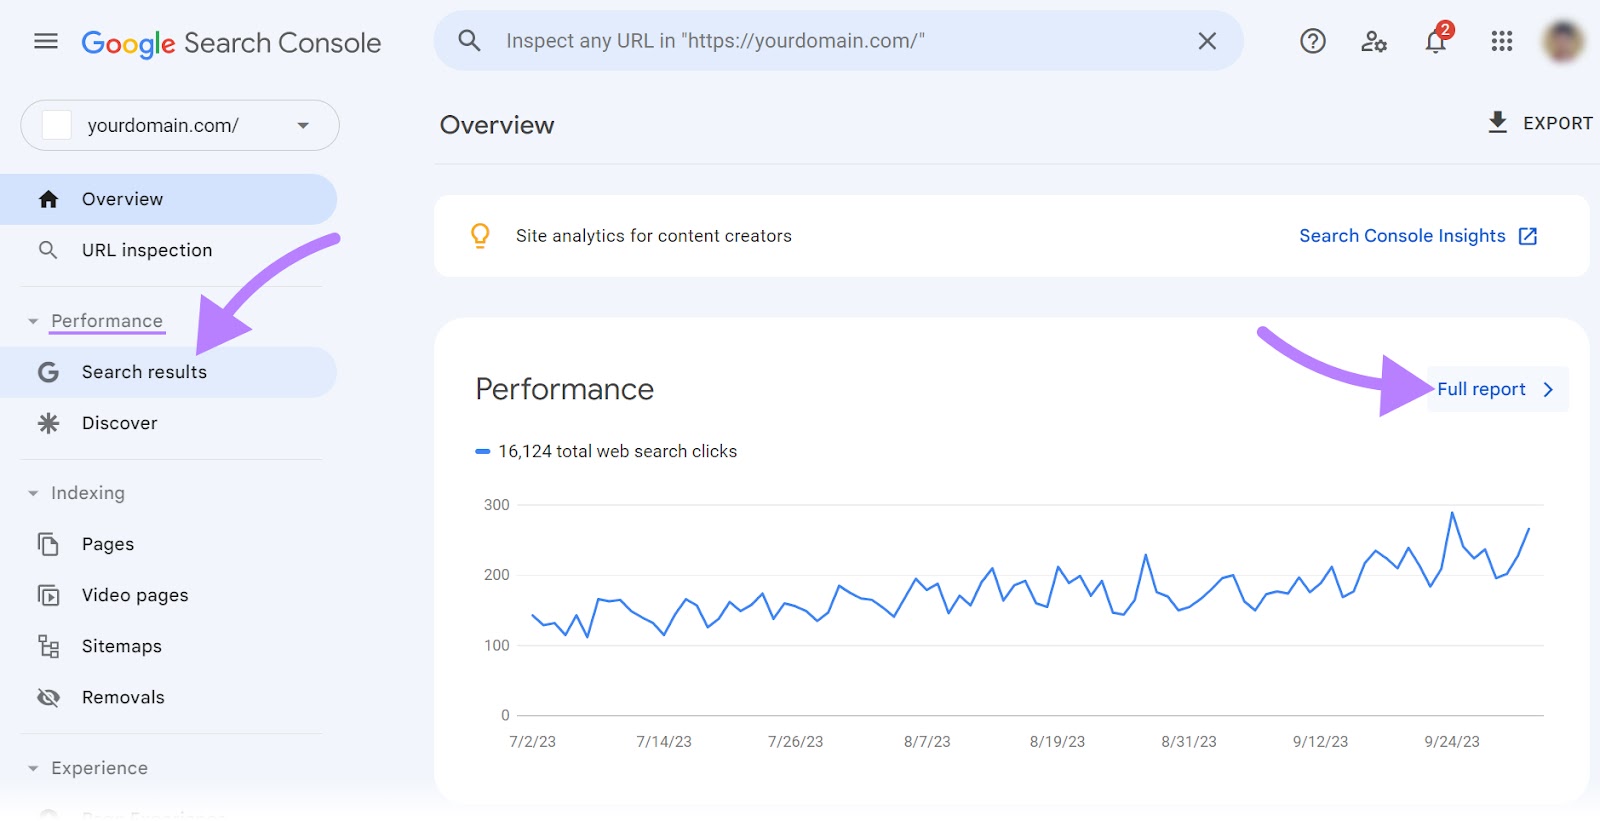 "Full report" button selected next to "Performance" graph in Google Search Console